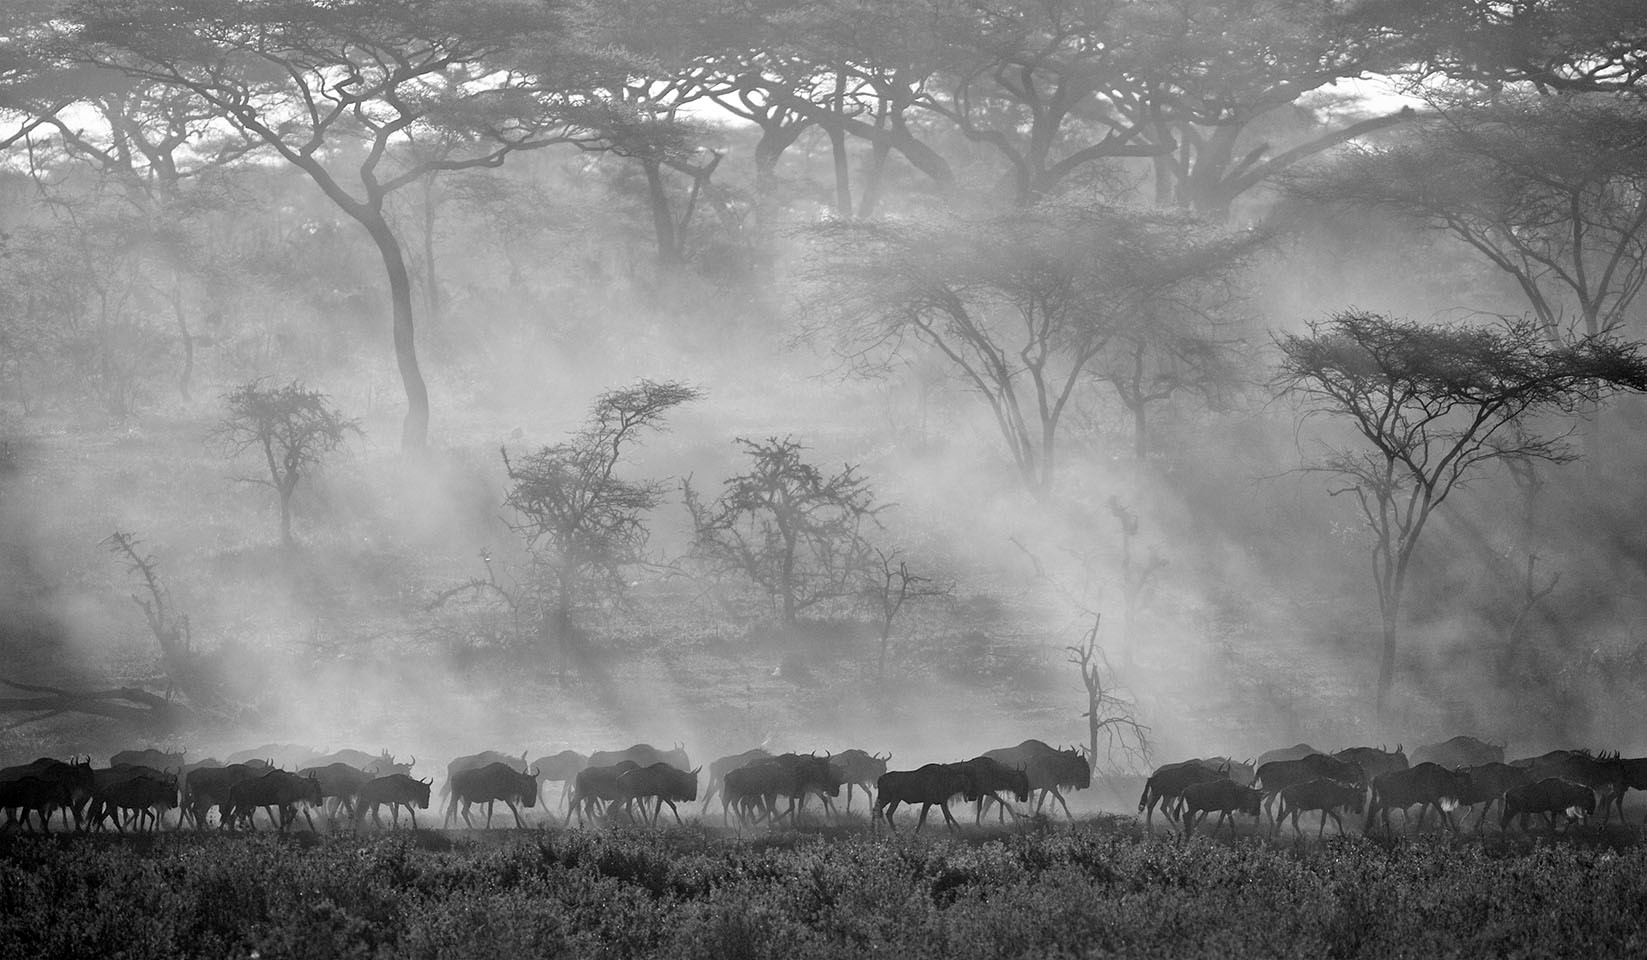 Black and white picture of wildebeests